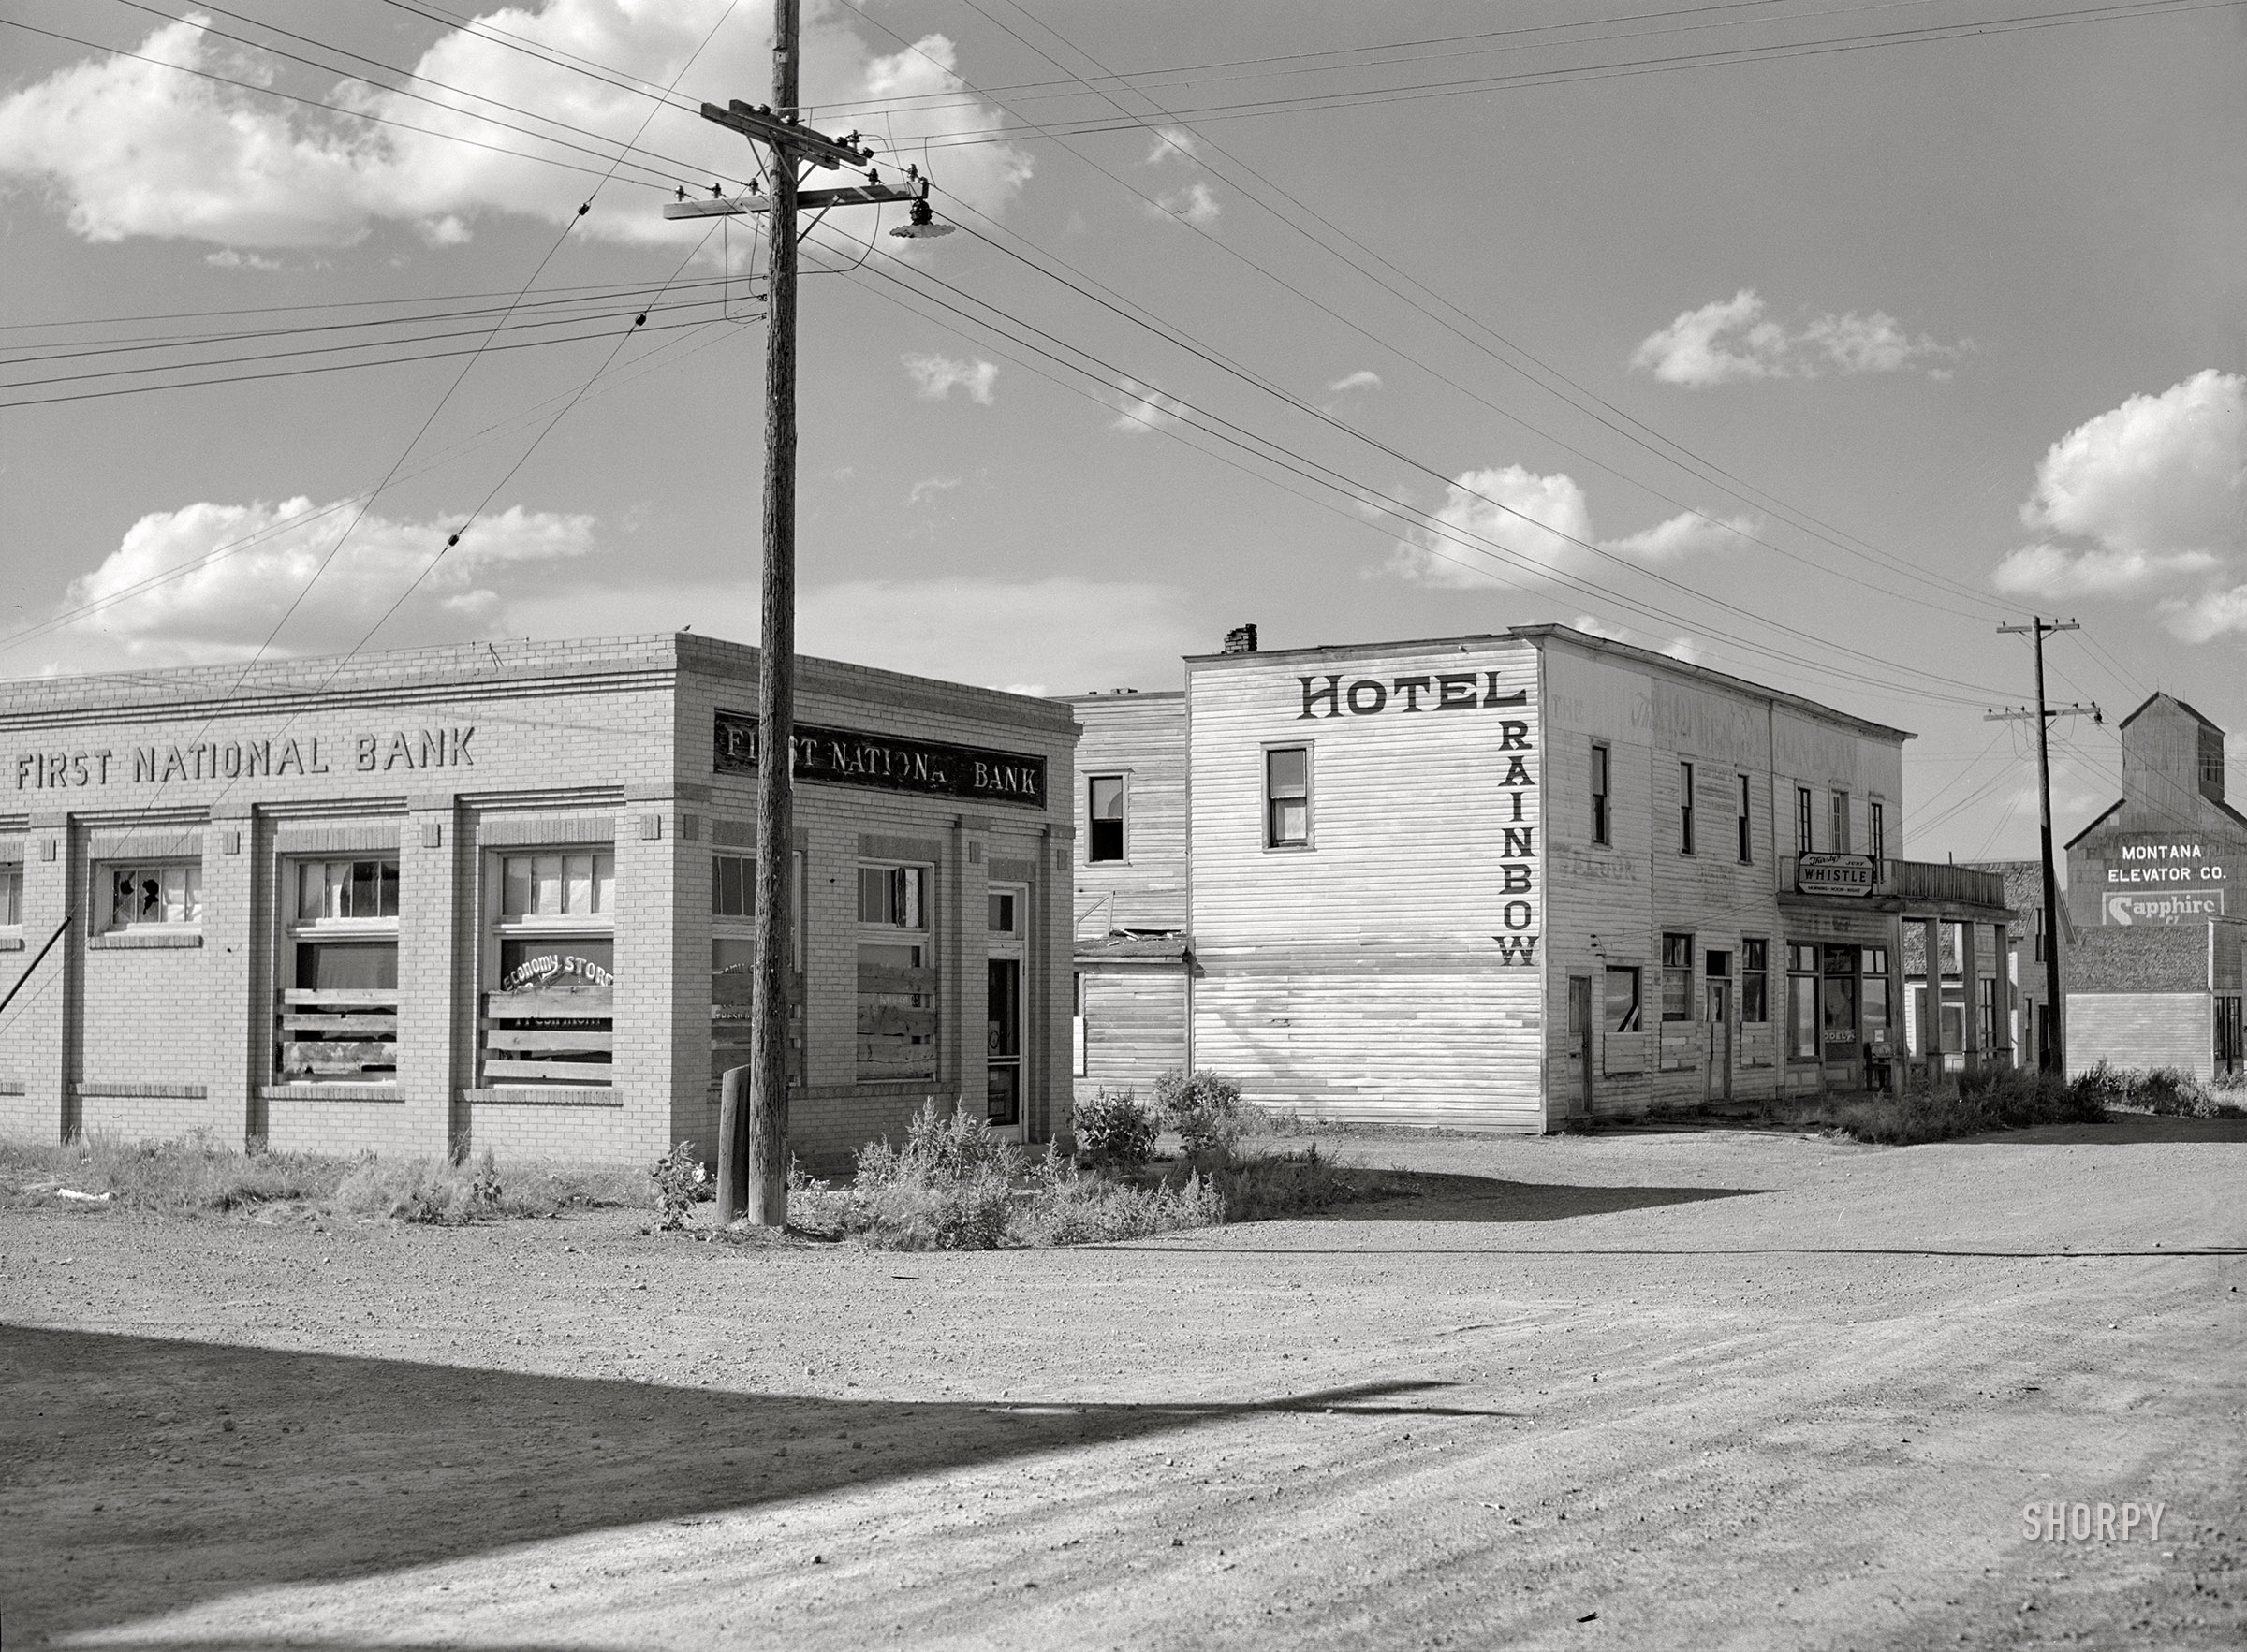 September 1941. "Buildings on main street of ghost town. Judith Basin, Montana." Medium format negative by Marion Post Wolcott for the Farm Security Administration. View full size.